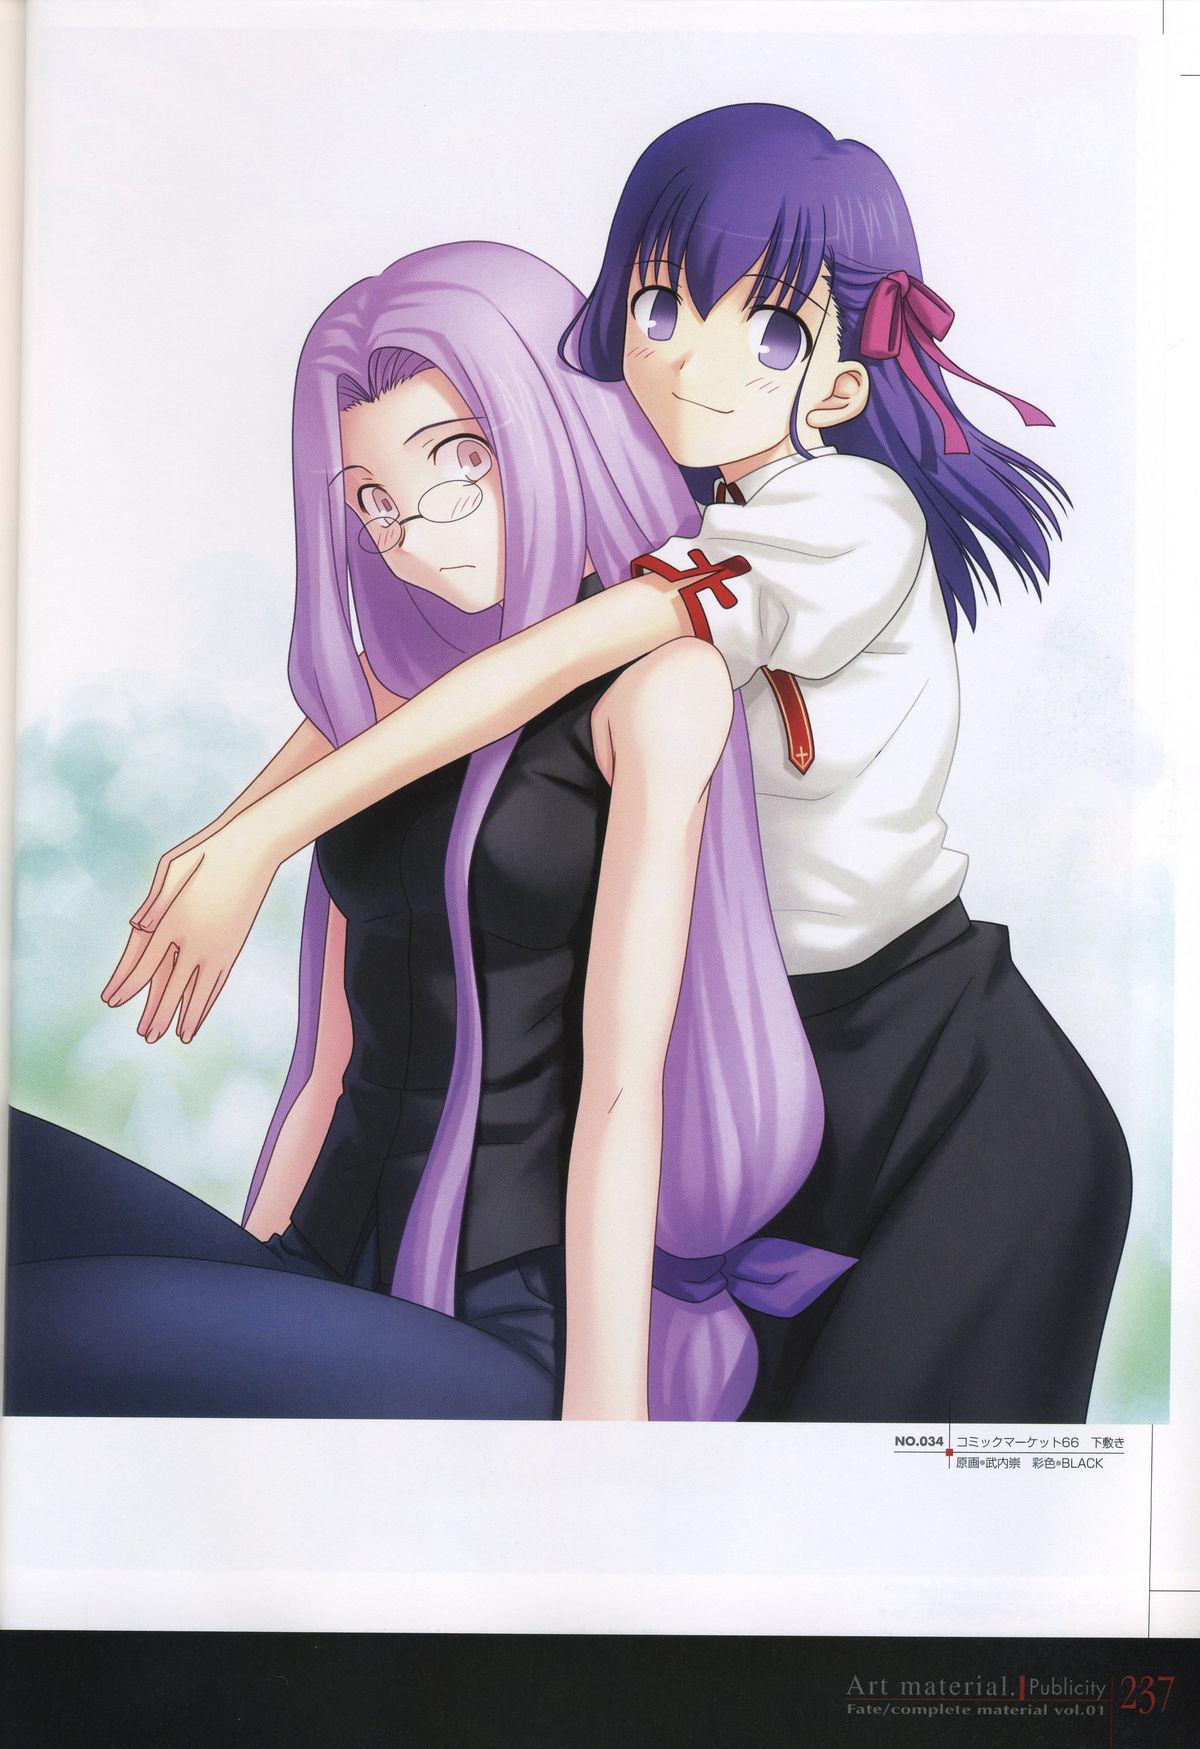 Fate/complete material I - Art material. 241